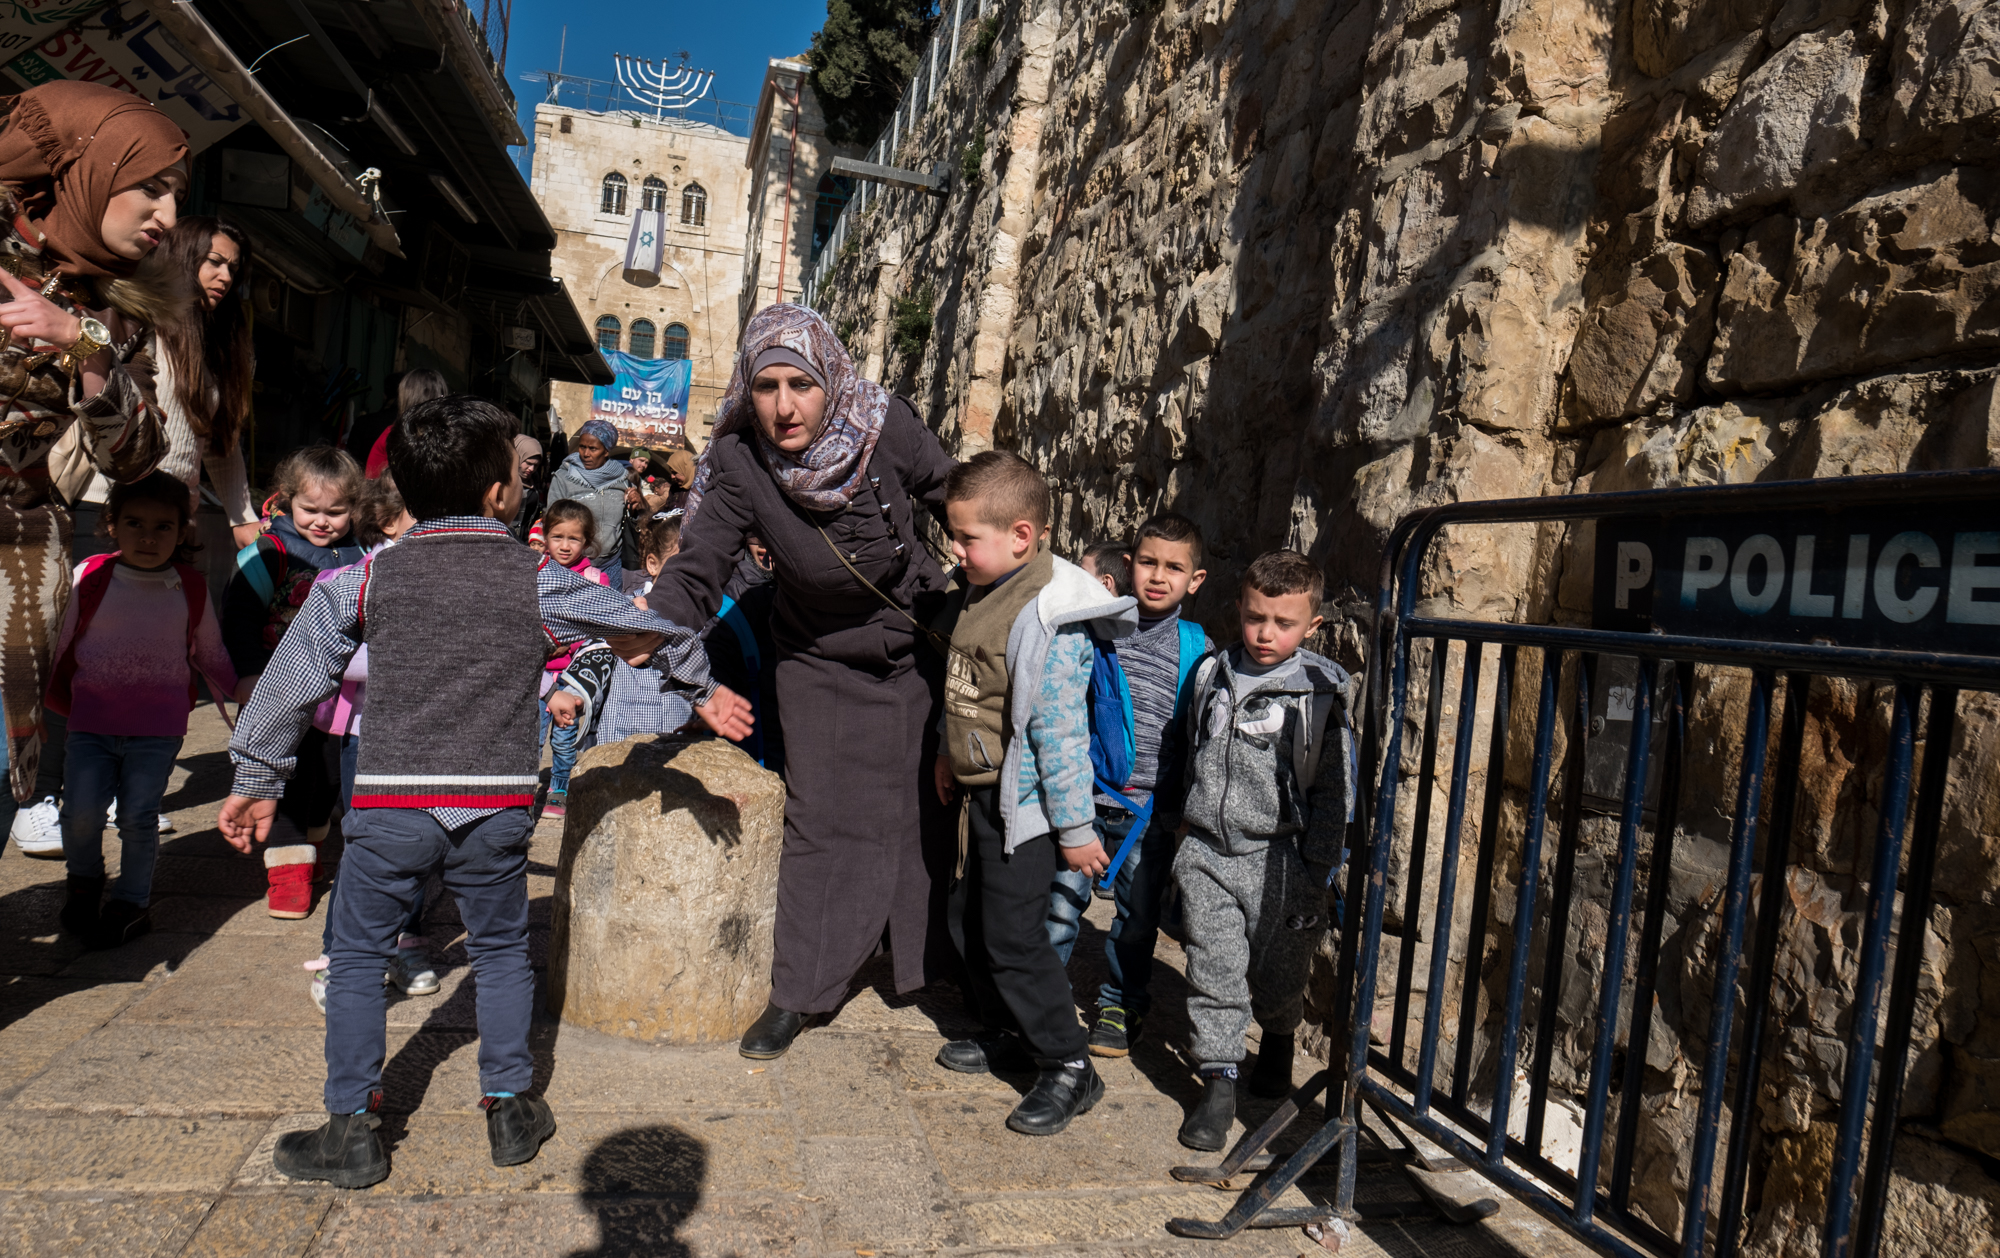 A Palestinian teacher tries to keep her students in line as they walk on the Via Dolorosa in Jerusalem's Old City.